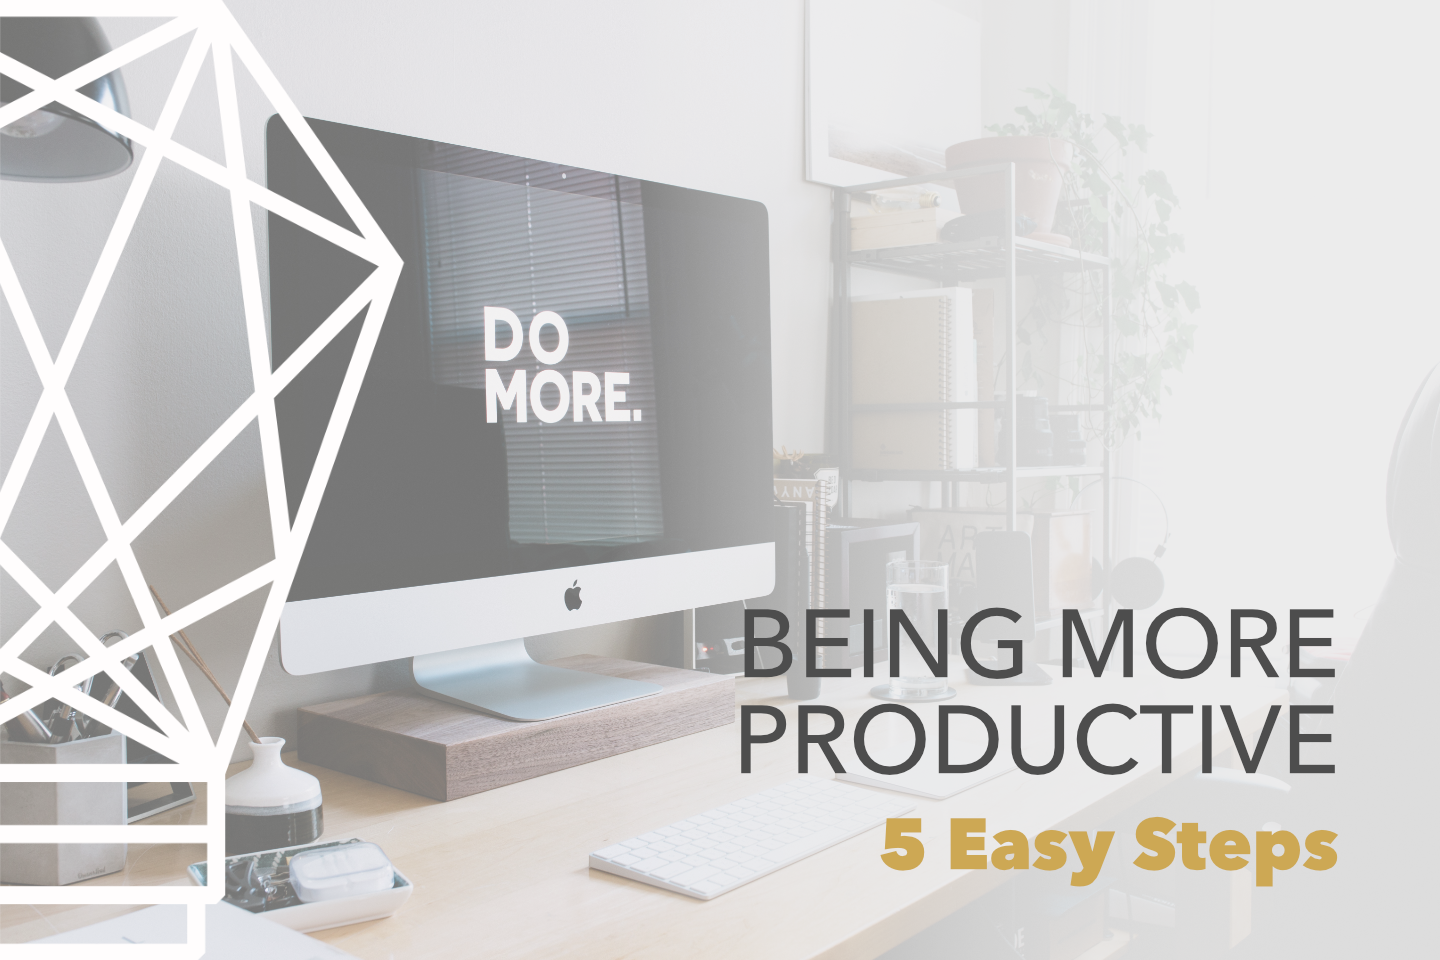 https://www.luminatemarketing.com/being-more-productive-5-easy-steps/